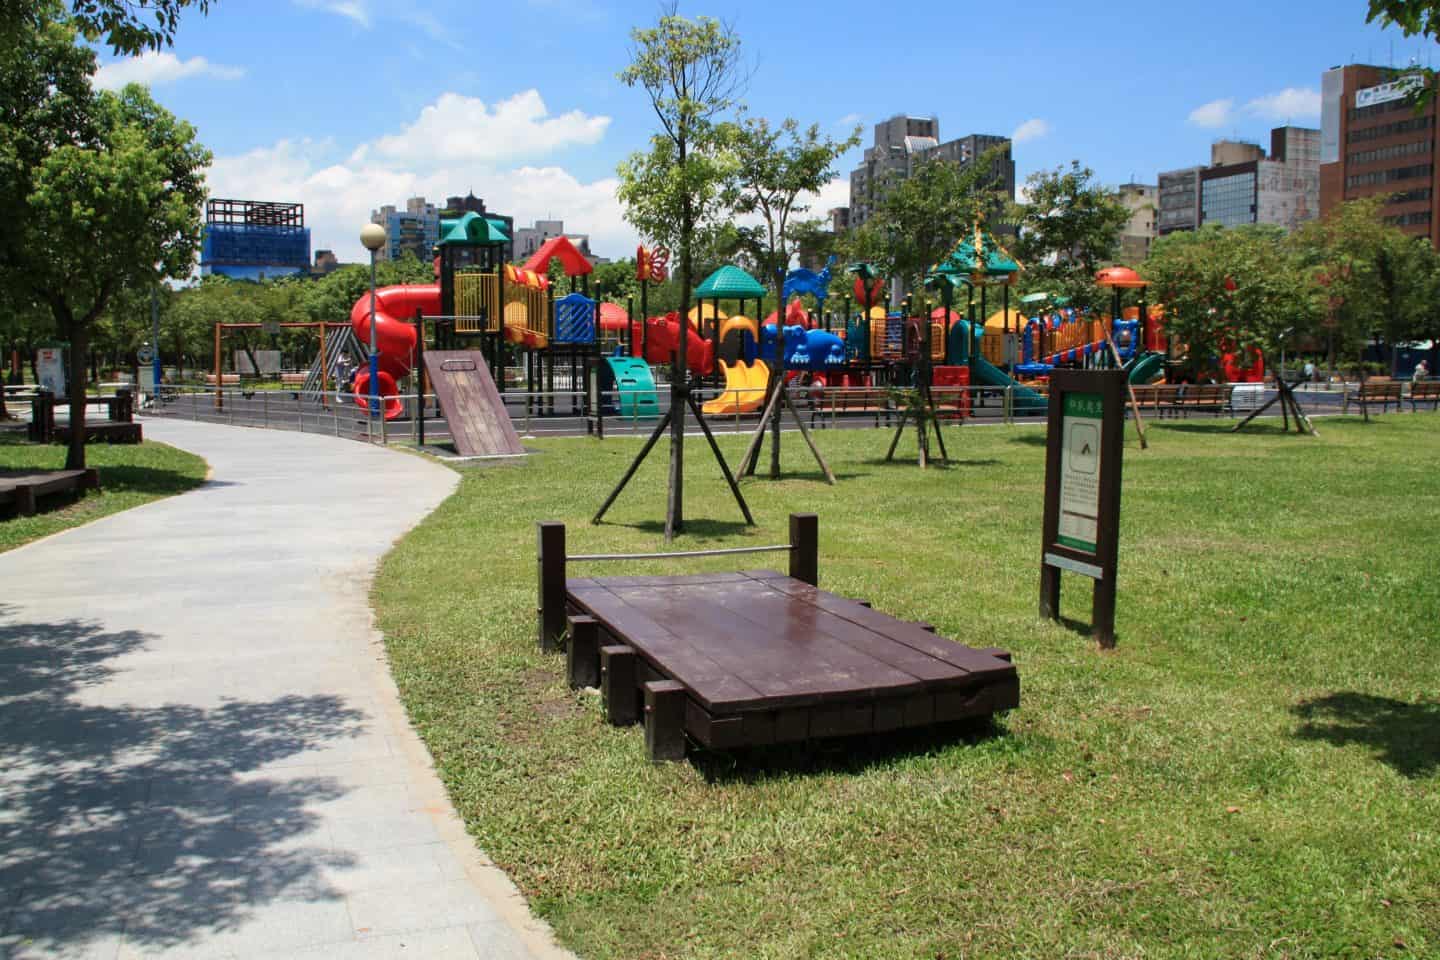 Playground at Daan Park for kids